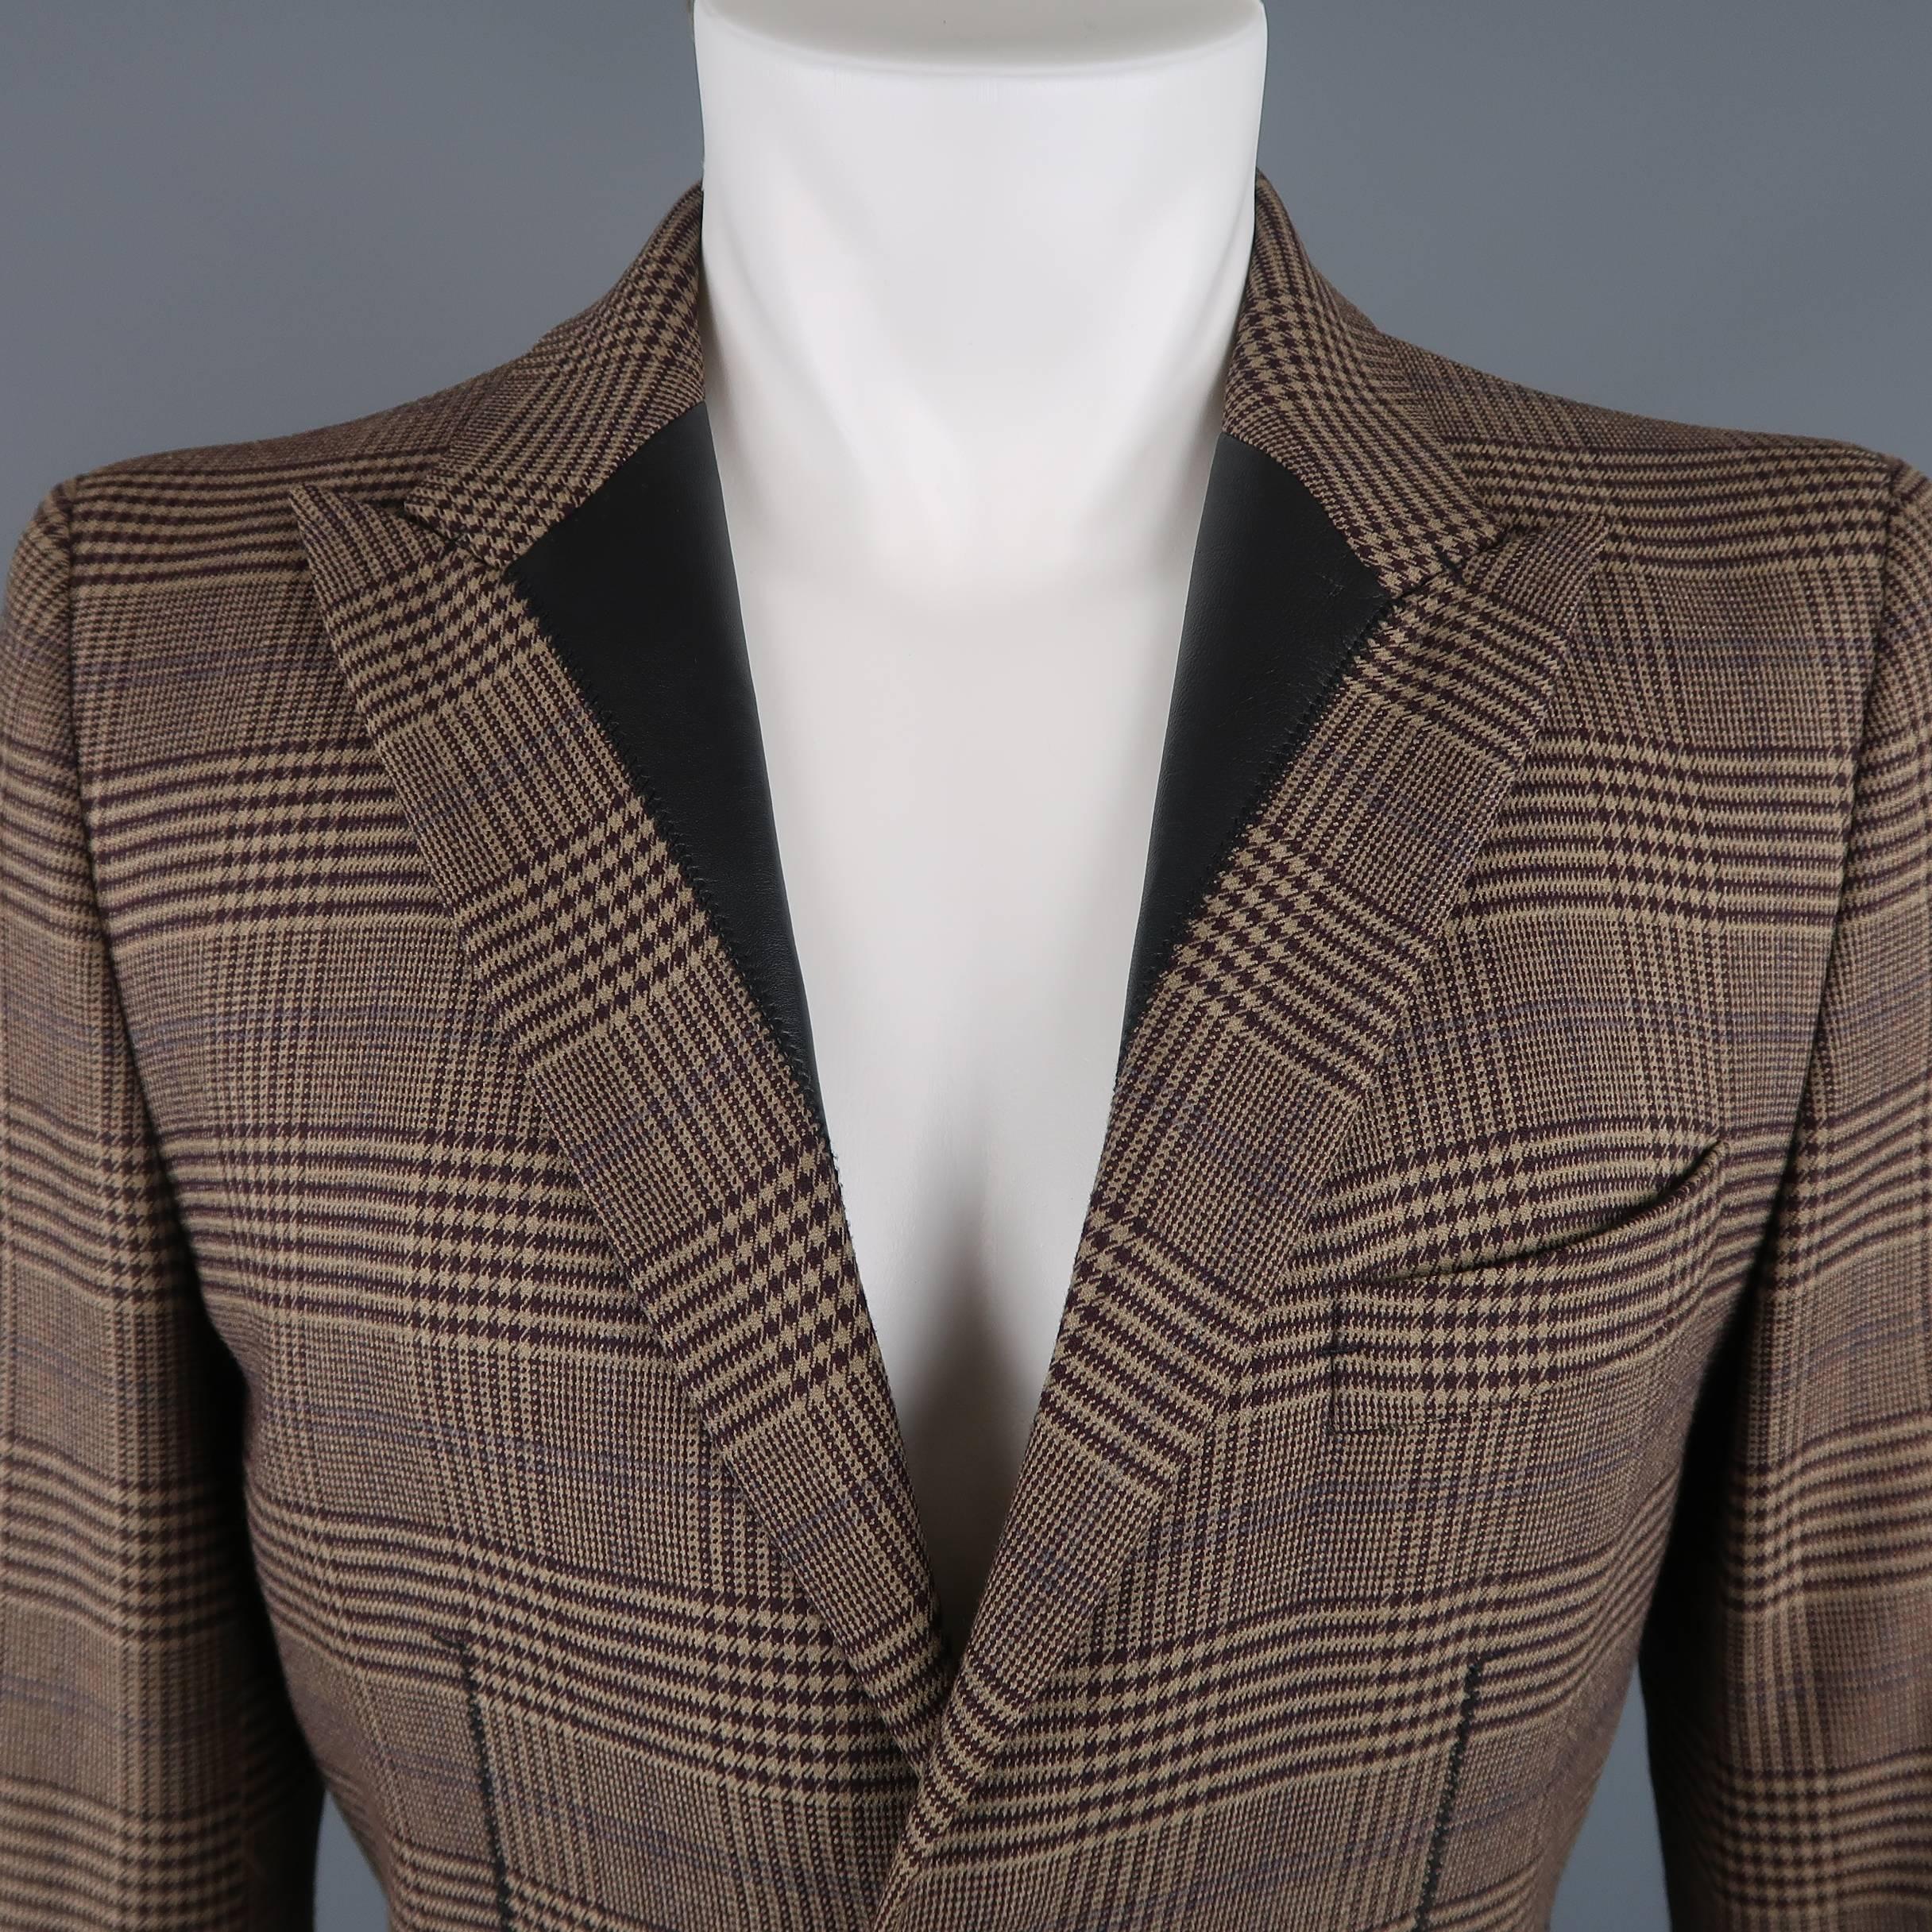 Vintage GAULTIER2 by Jean Paul Gaultier  sport coat comes in tan wool blend with eggplant purple plaid print throughout, two button front, functional button cuffs, and peak lapel with black leather details. Made in Italy.
 
Excellent Pre-Owned